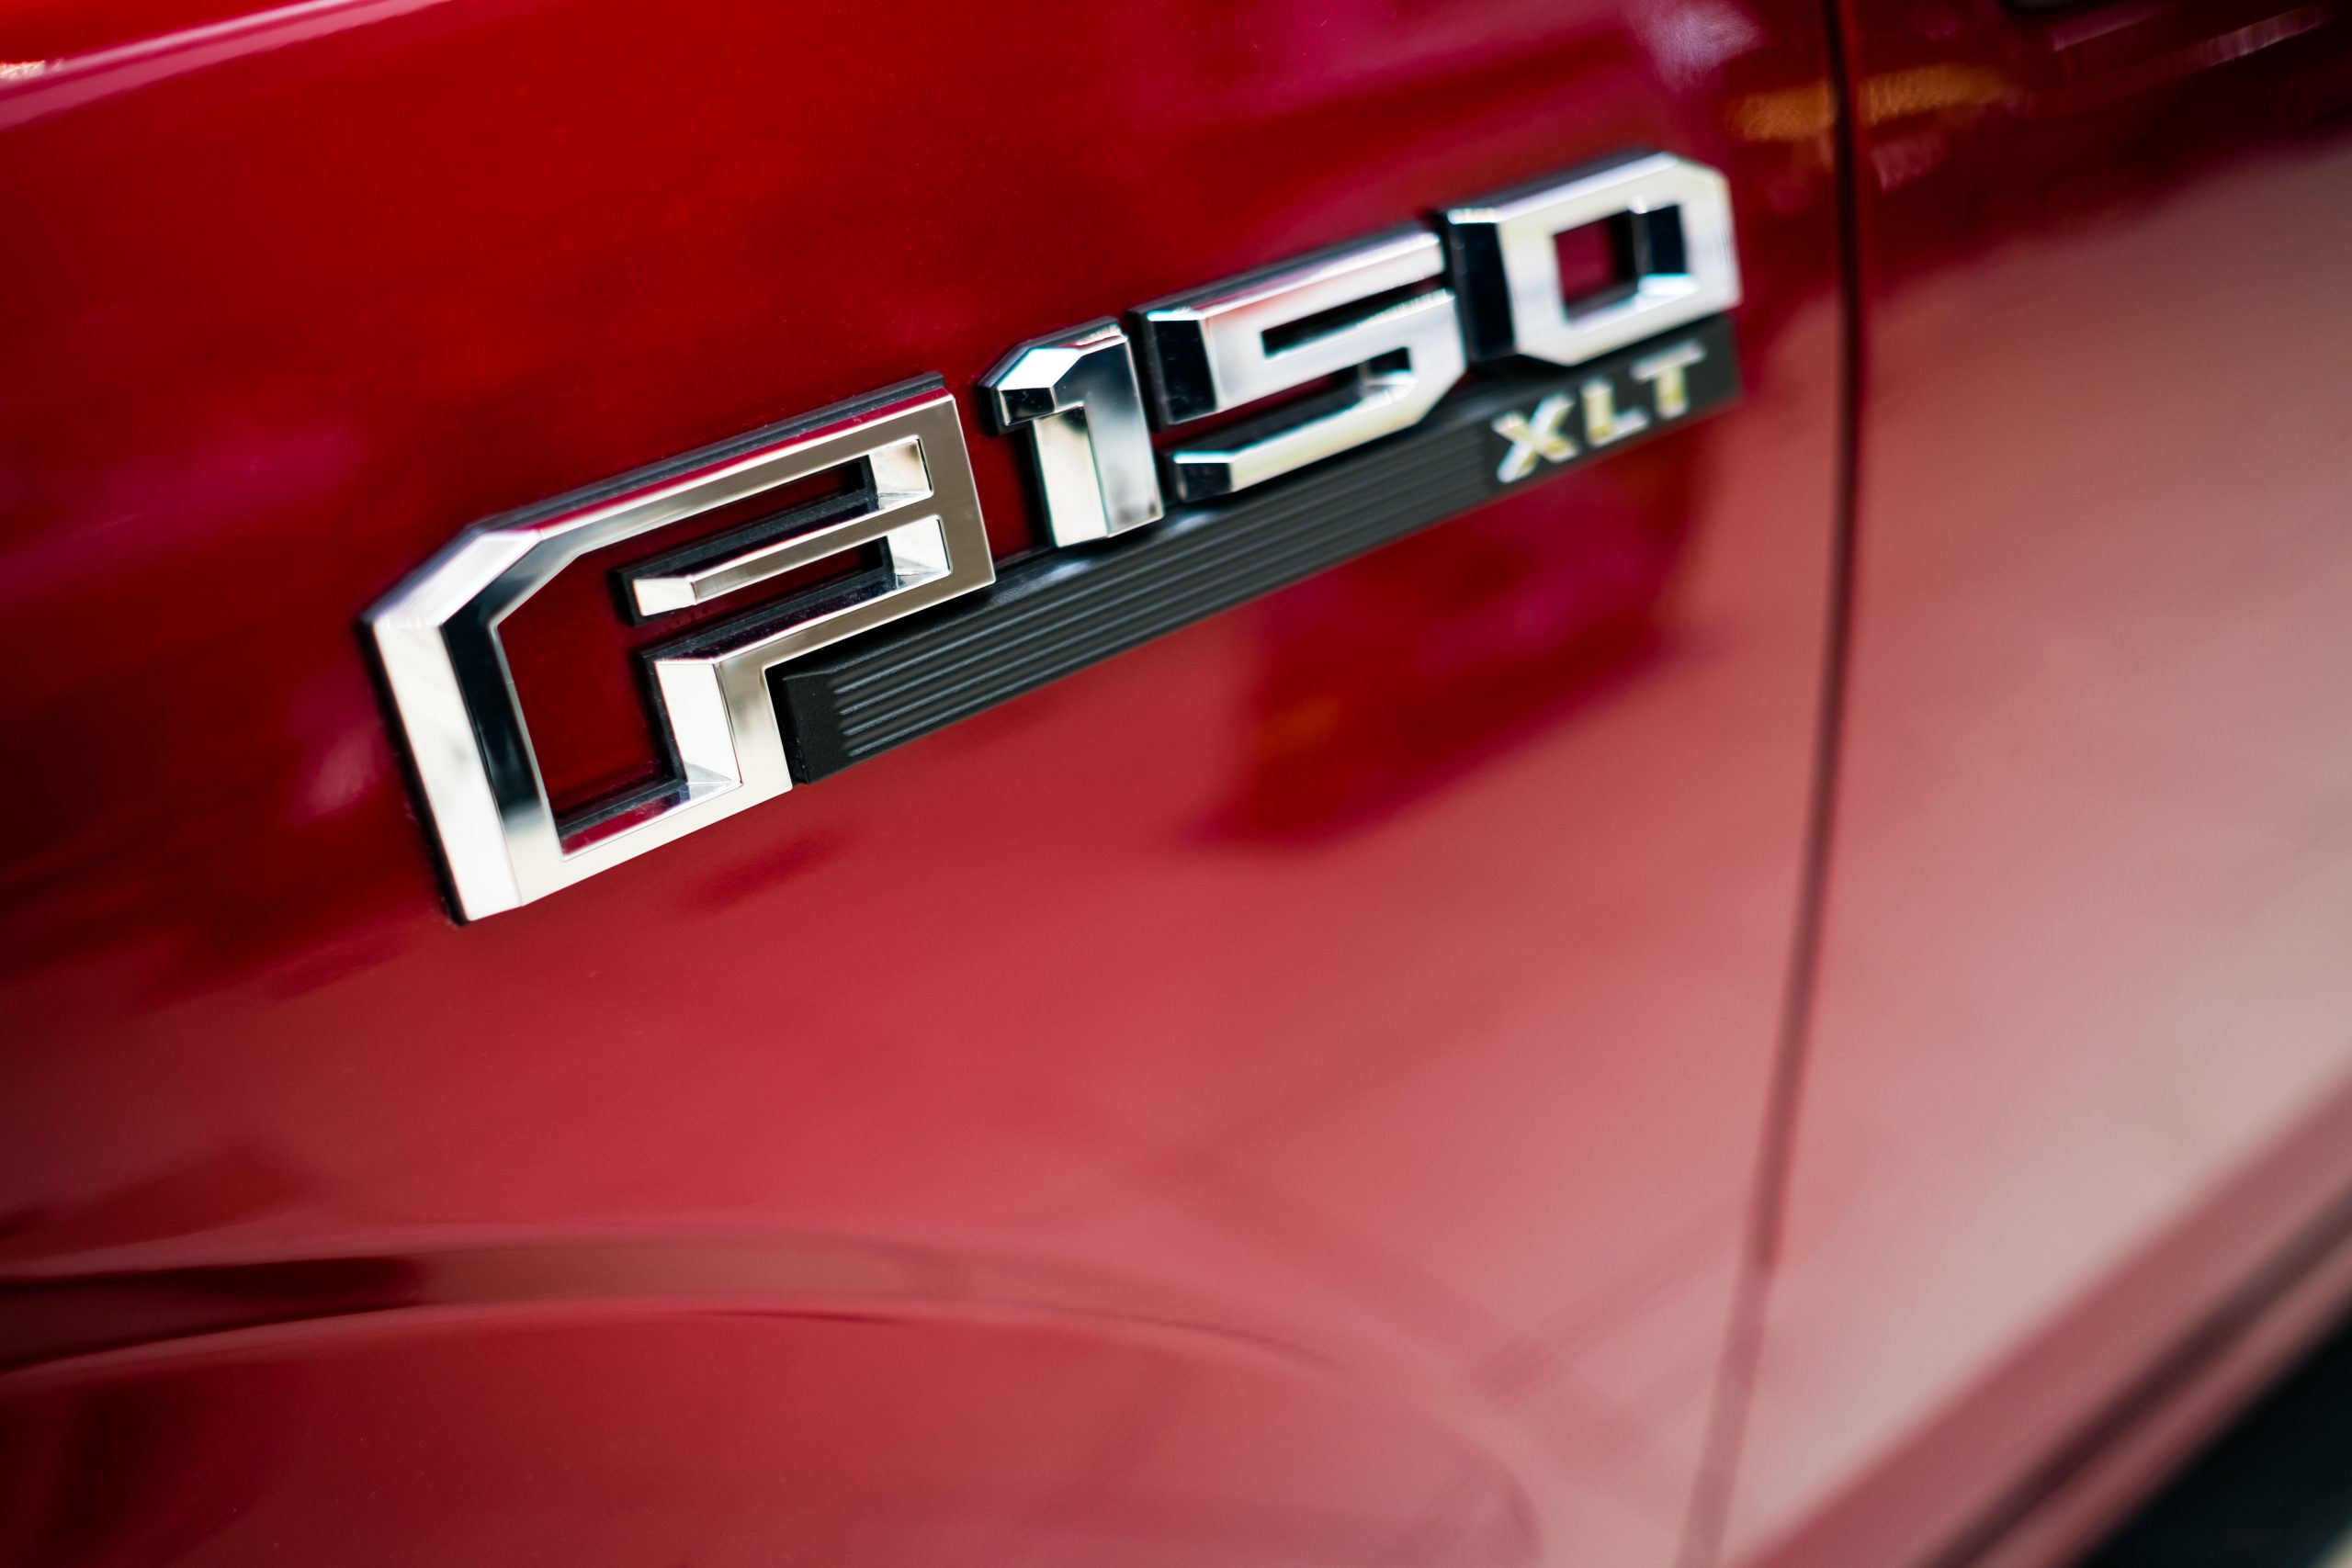 A lawsuit alleges a 10R80 10-speed transmission defect in certain Ford vehicles.